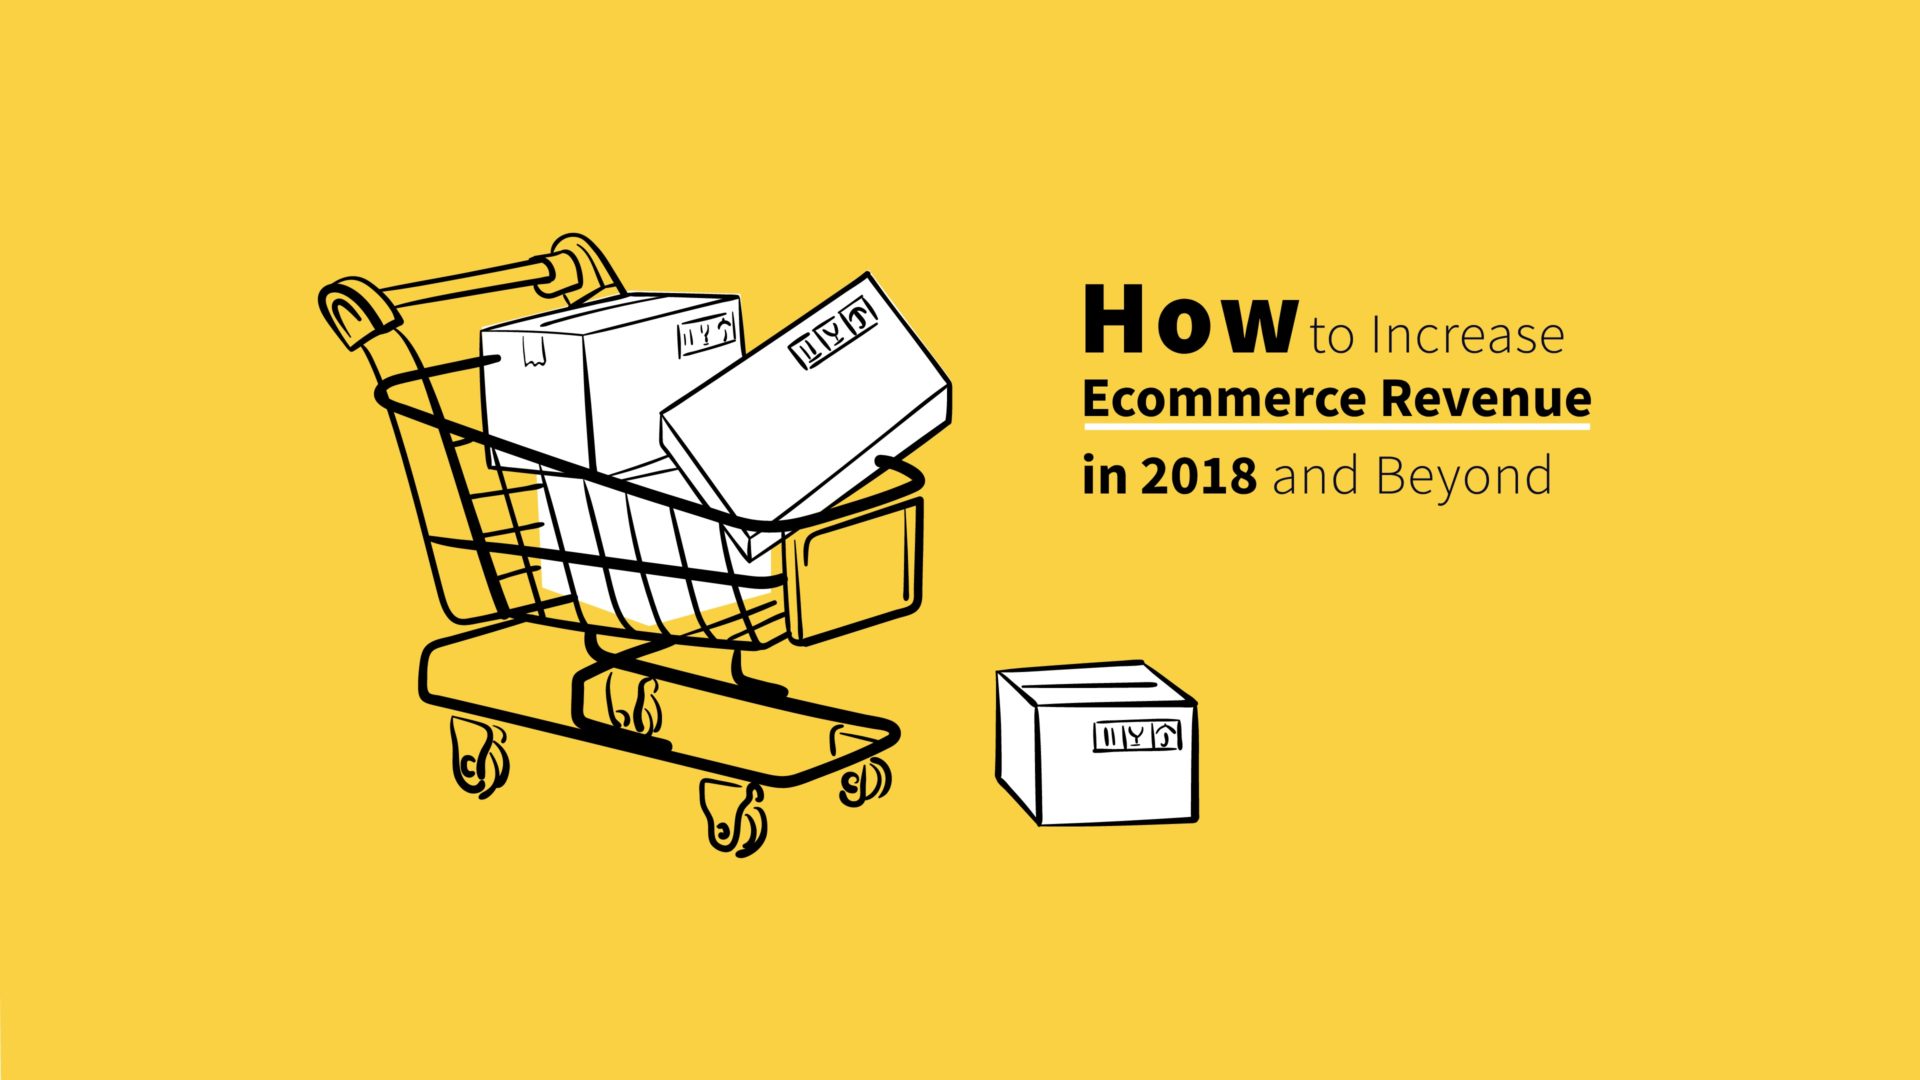 How to Increase Ecommerce Revenue in 2018 and Beyond